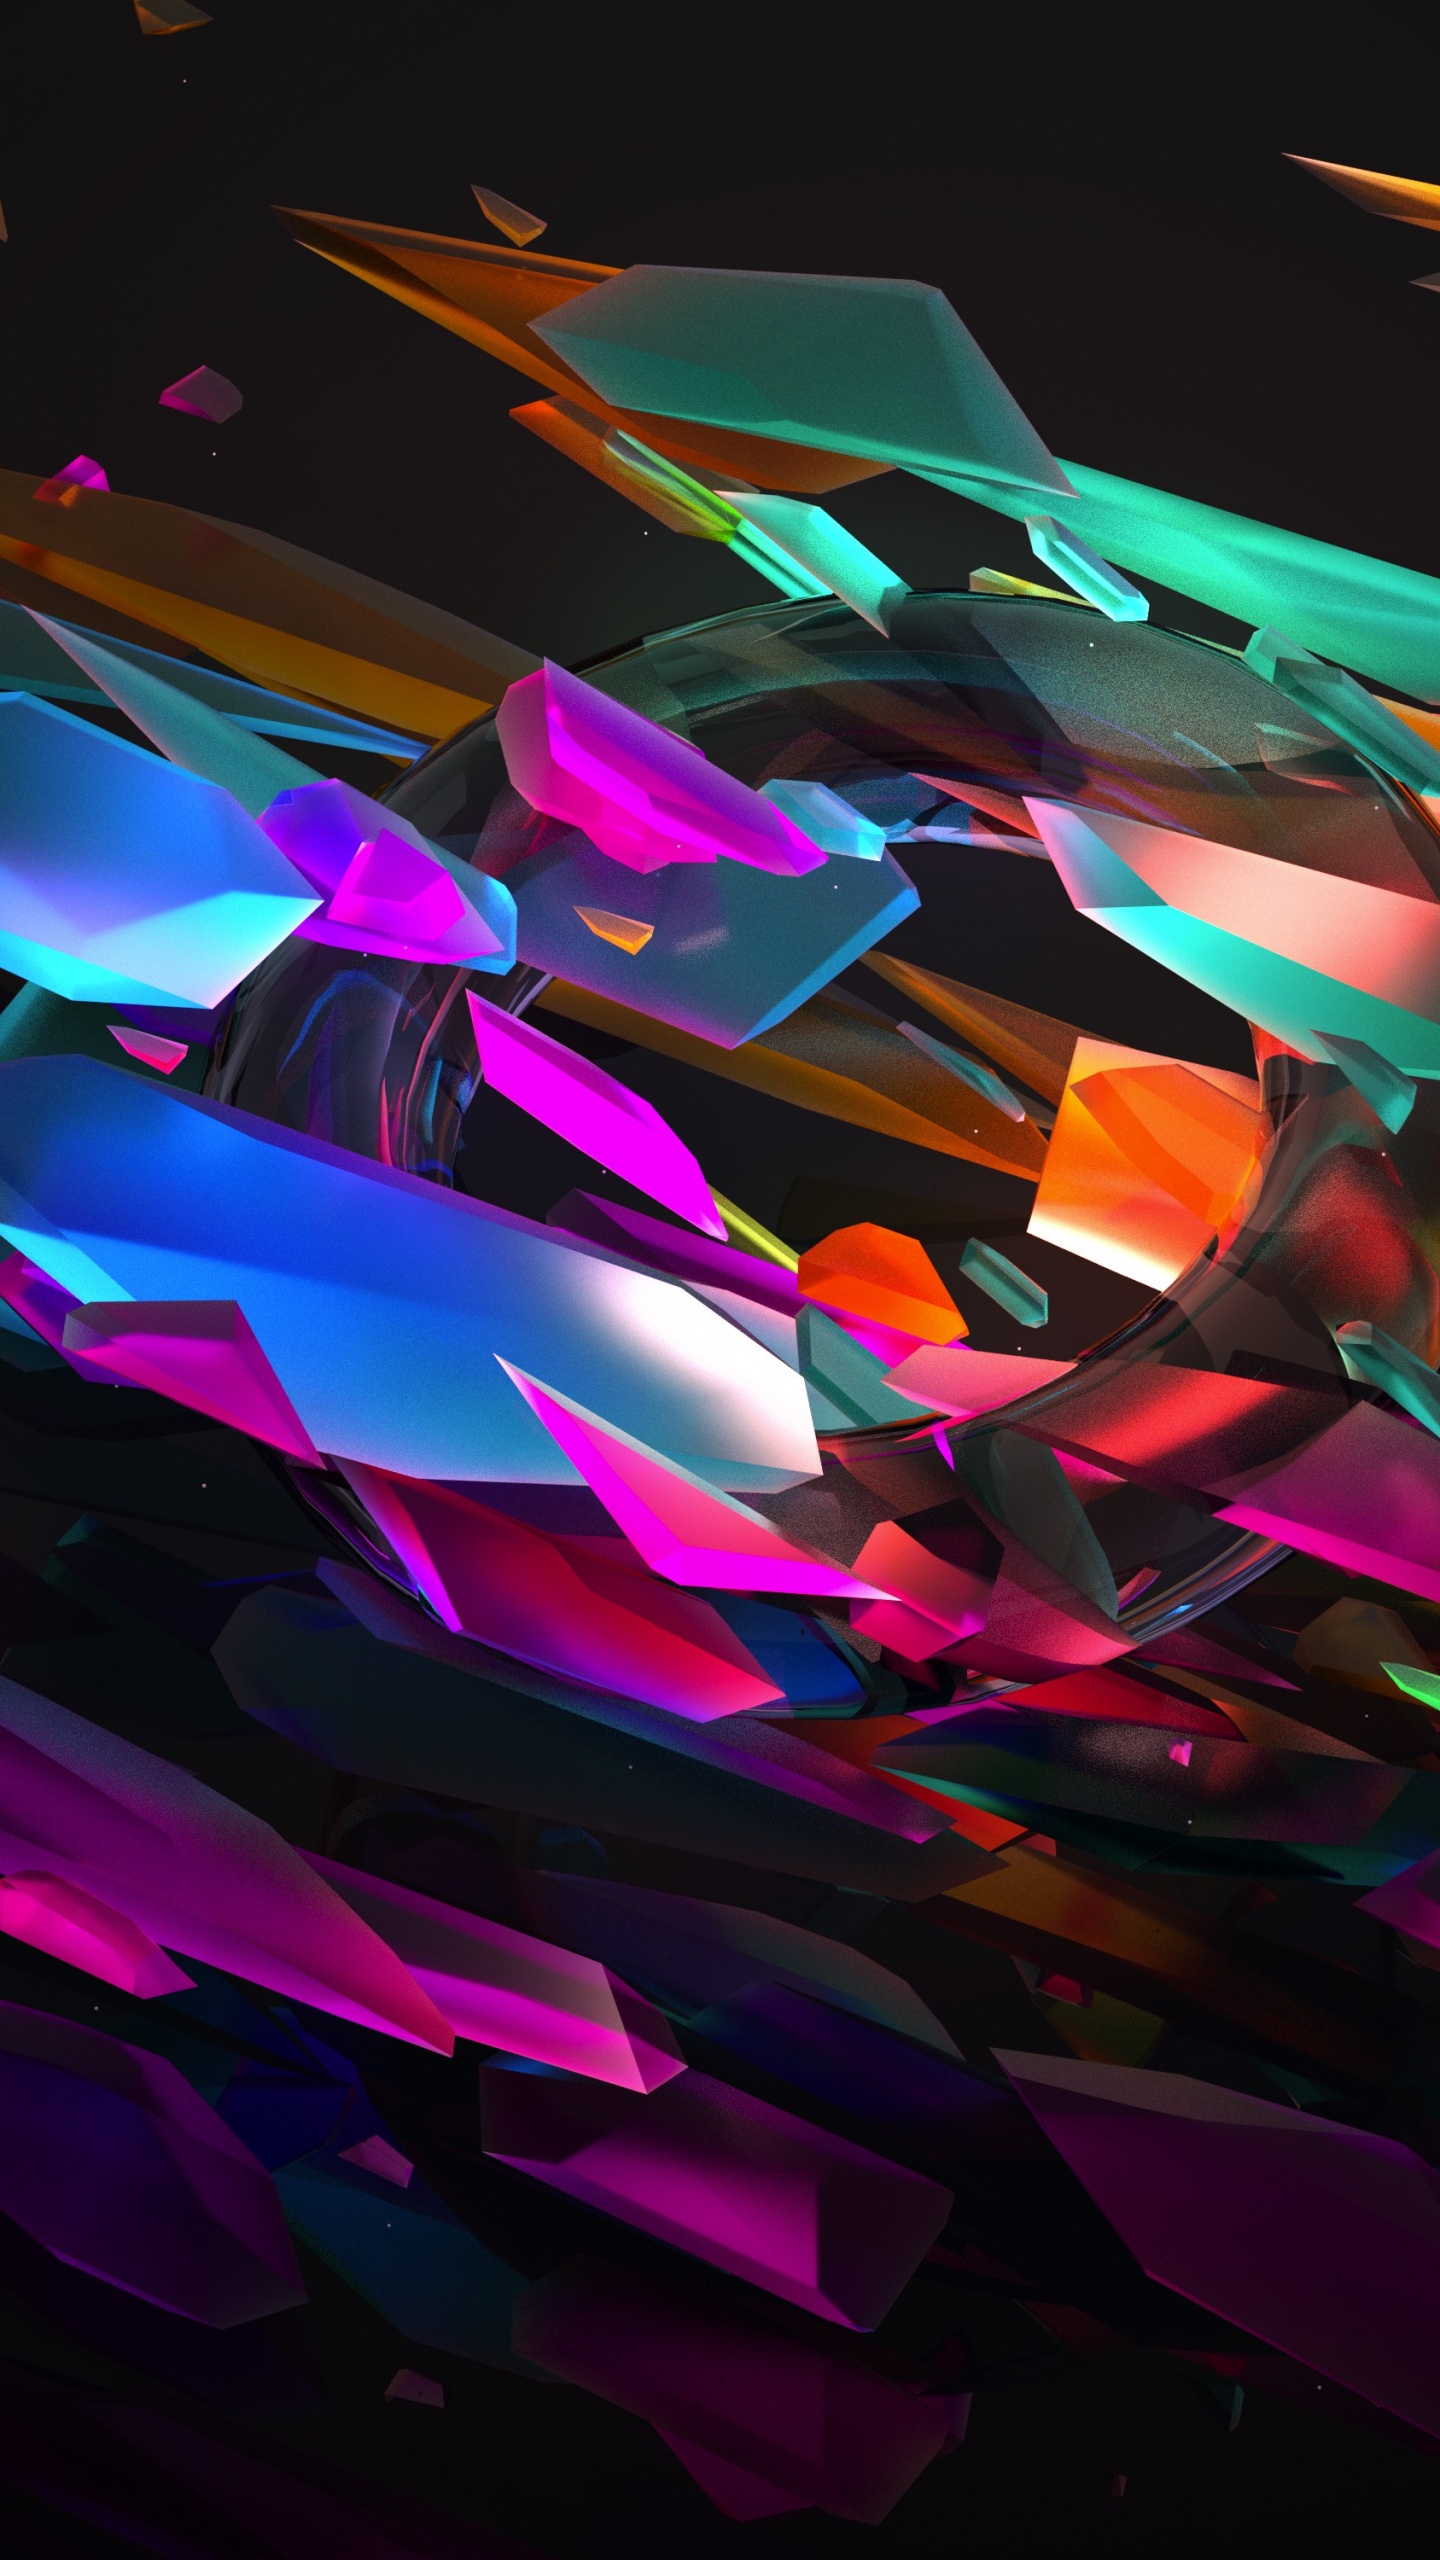 Purple Orange and Blue Abstract Art. Wallpaper in 1440x2560 Resolution